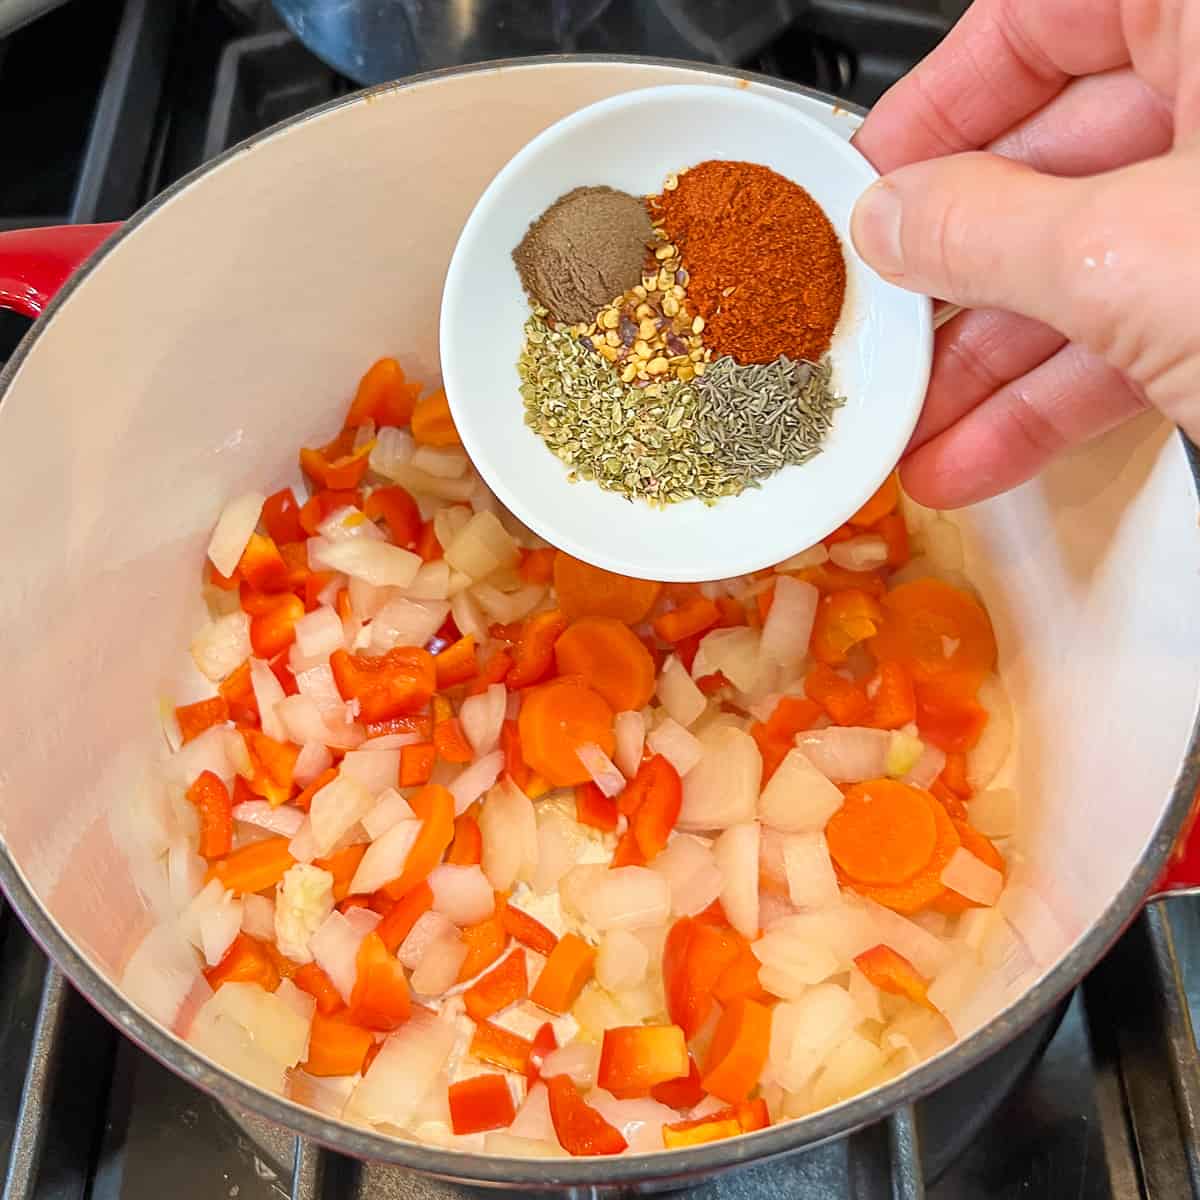 Dried spices being added to a pot with vegetables on the stovetop.